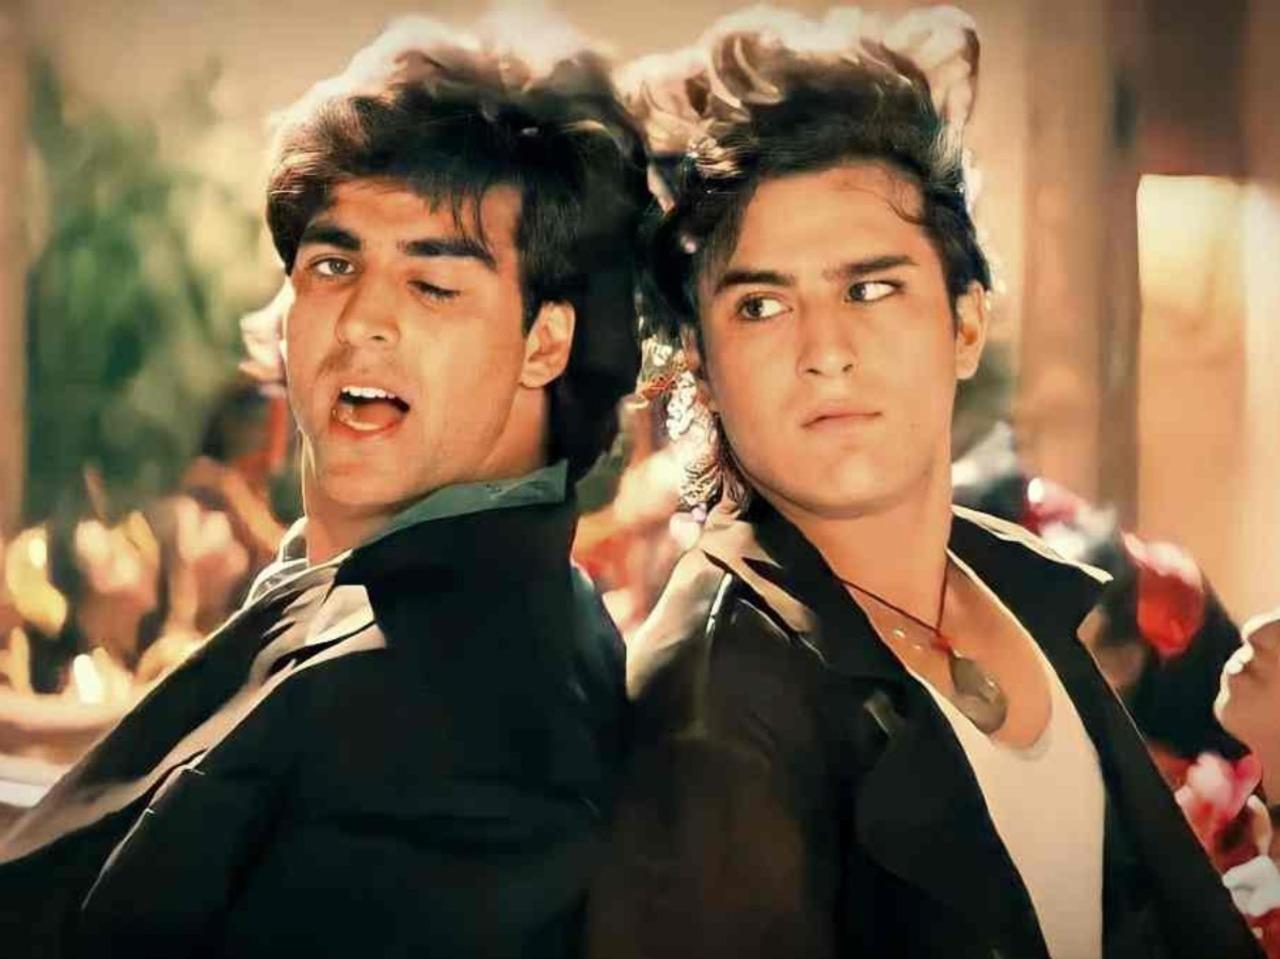 Main Khiladi Tu Anari (1994) 
A forced circumstance leads to Inspector Karan (Akshay Kumar) and actor Deepak (Saif Ali Khan) to spend time together. While initially, they are not much fond of each other, it later develops into a great friendship